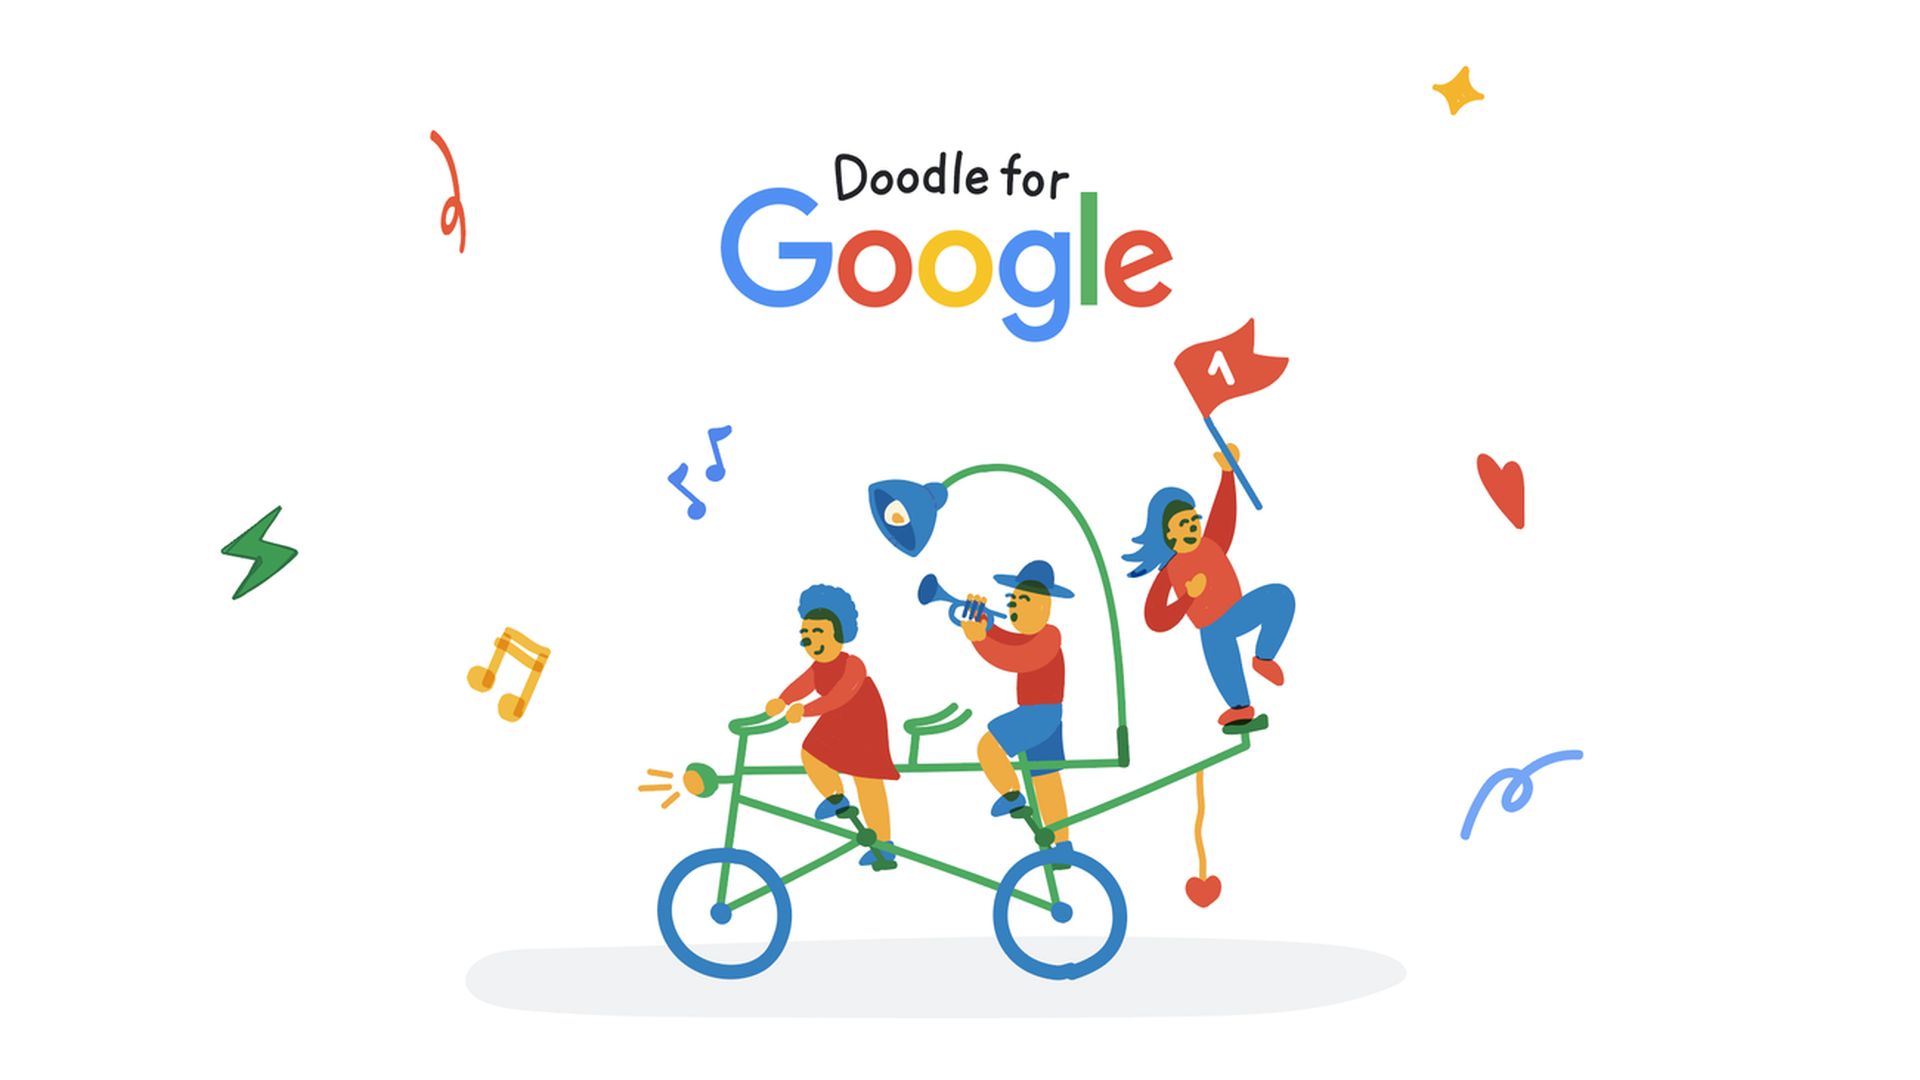 Google has concluded the contest and announced the Doodle for Google 2022 winner, Sophie Araque-Liu of Florida is the top prize winner.